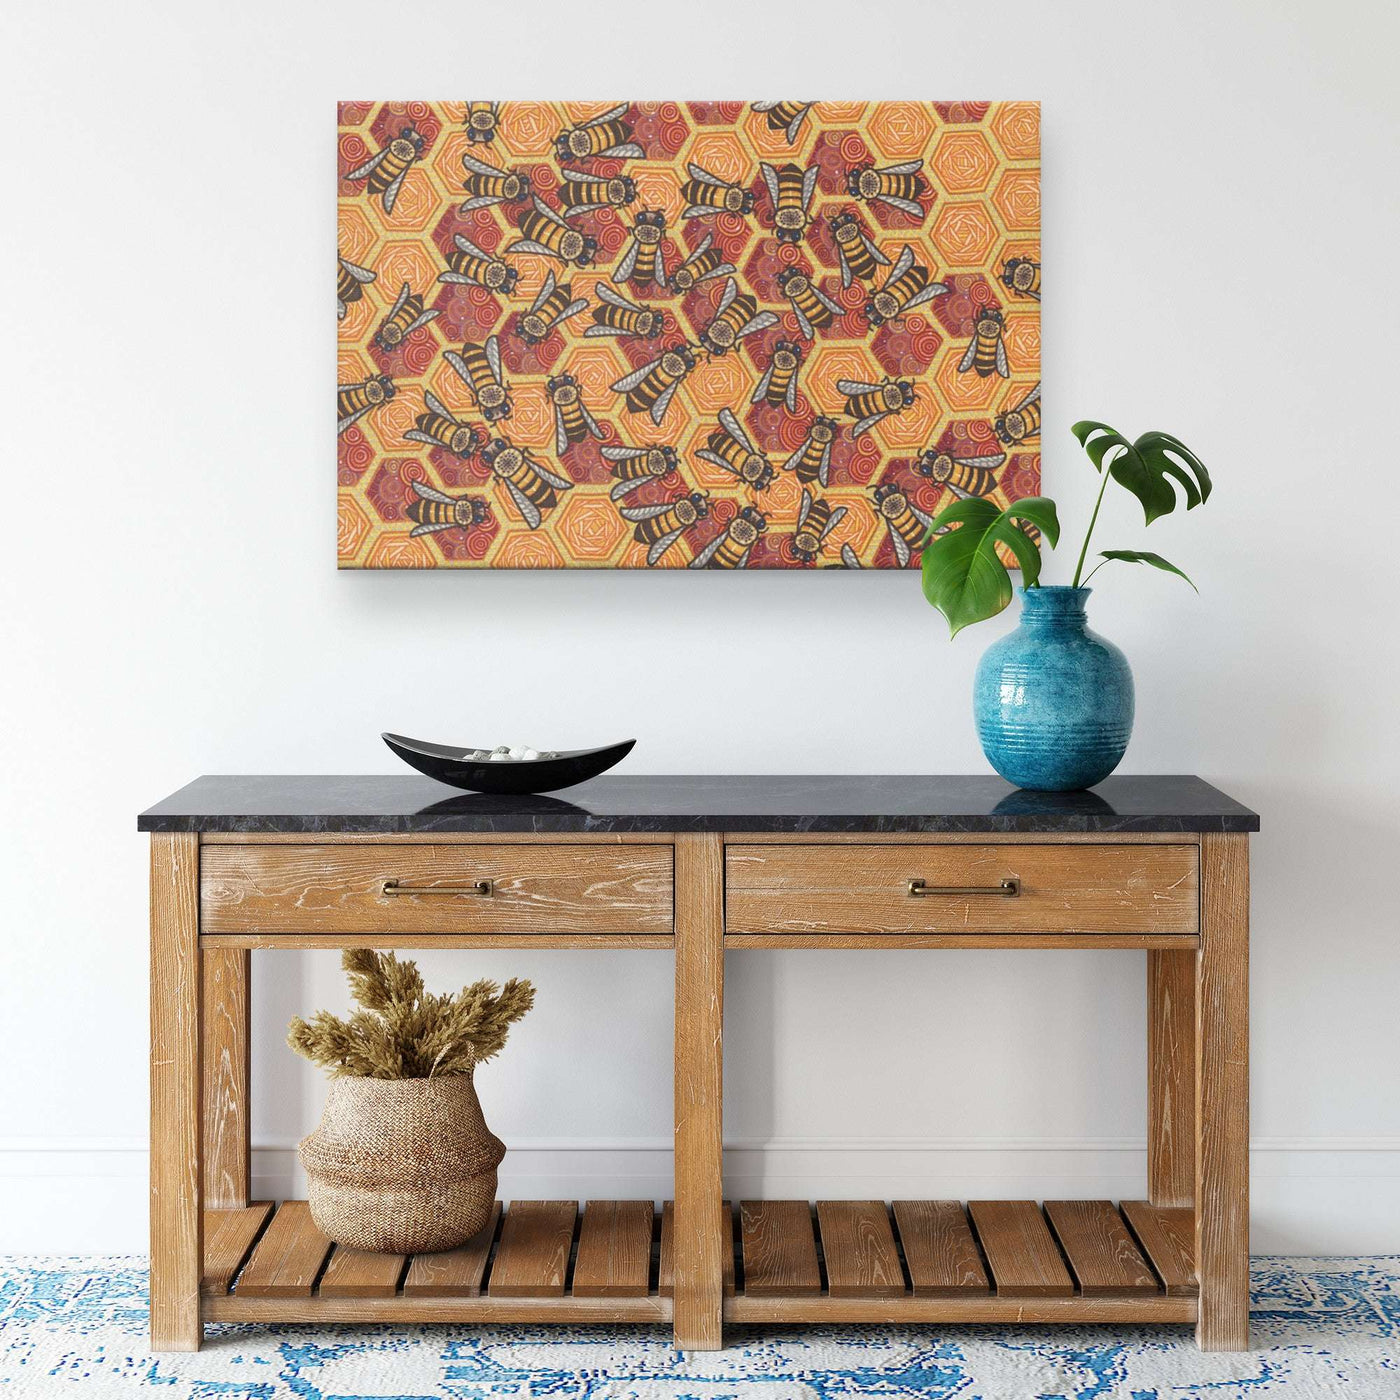 A wooden console table with two drawers, decorated with a patterned rug underneath, a blue vase with a plant, and a dry floral arrangement. The Honeycomb Harmony Canvas Print hangs above.